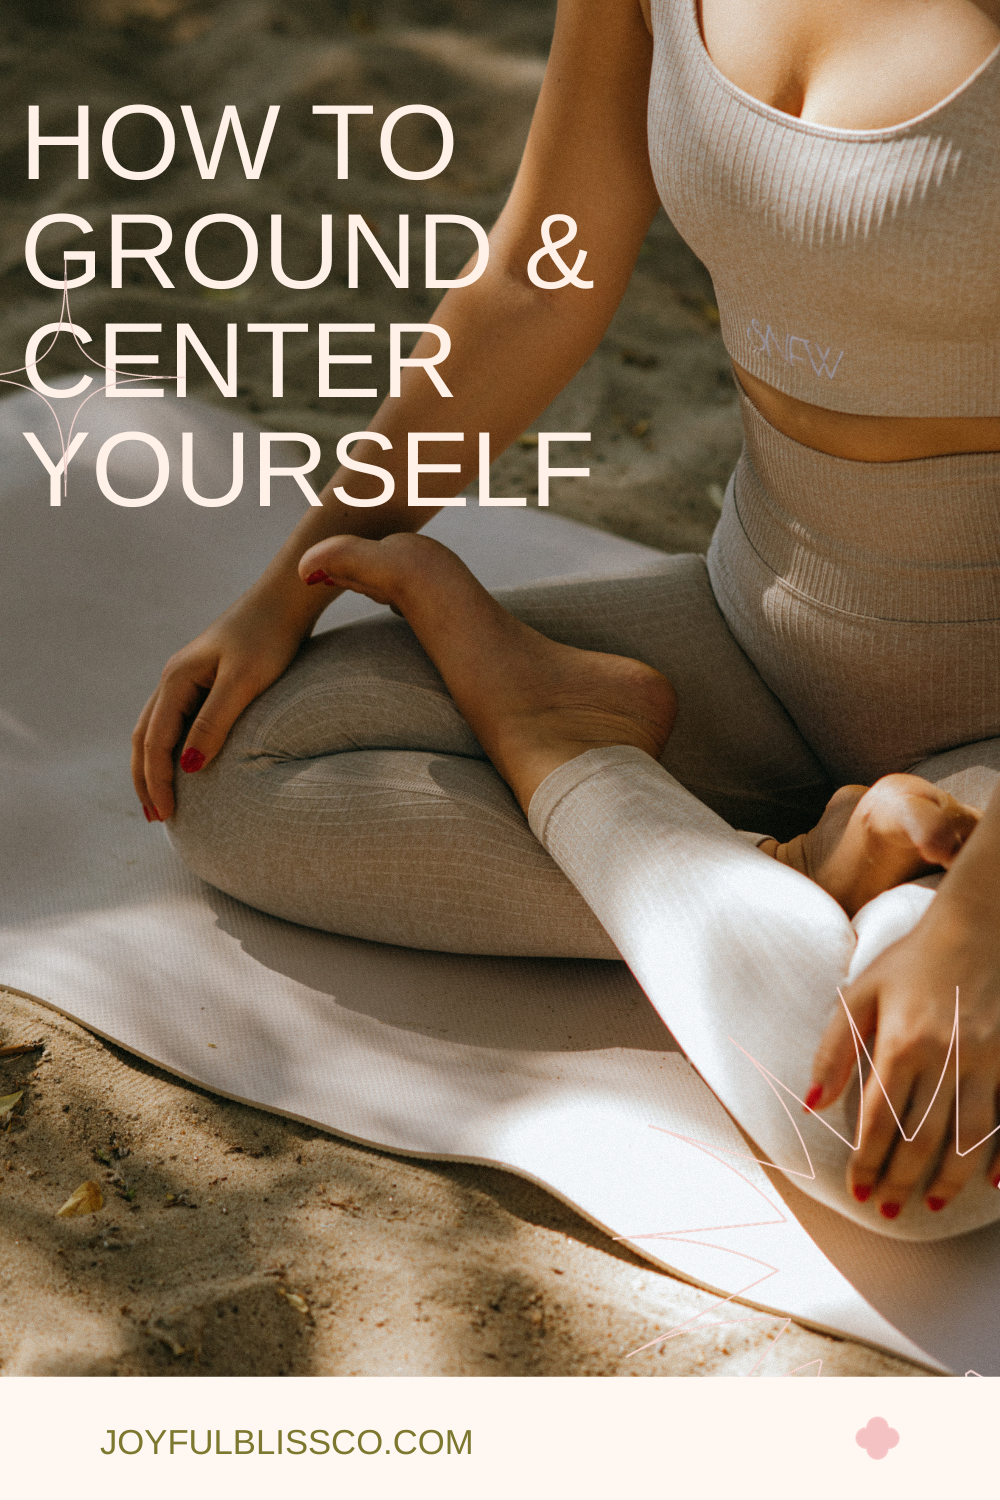 How To Ground & Center Yourself